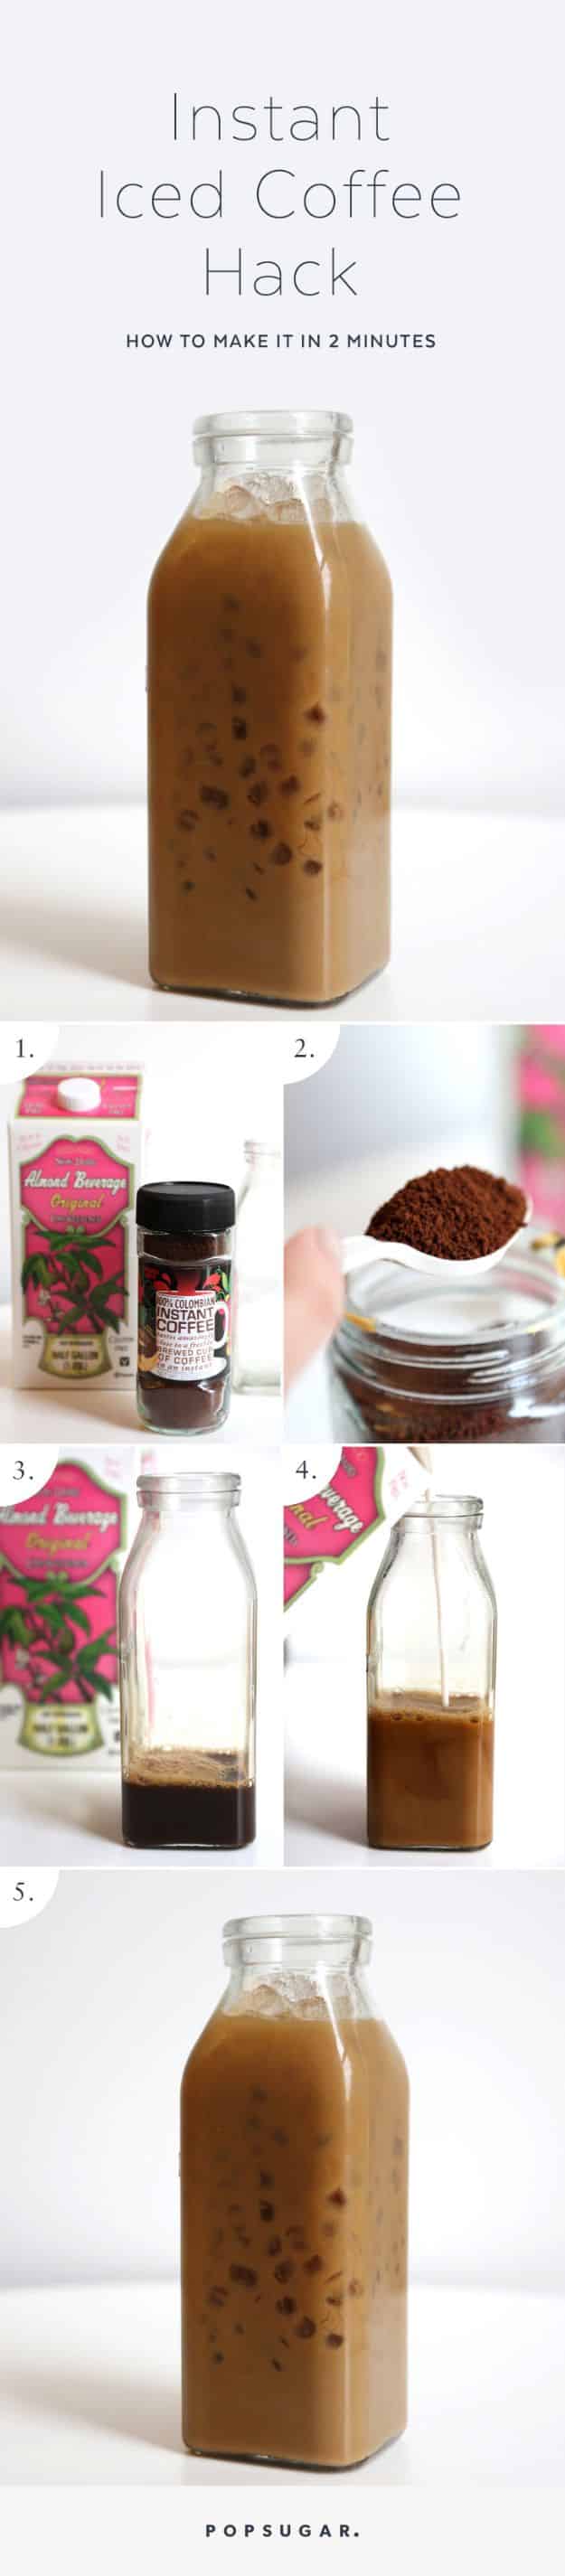 DIY Ideas for The Coffee Lover - Instant Iced Coffee Hack - Easy and Cool Gift Ideas for People Who Love Coffee Drinks - Coaster, Cups and Mugs, Tumblers, Canisters and Do It Yourself Gift Ideas - Gift Jars and Baskets, Fun Presents to Make for Mom, Dad and Friends http://diyjoy.com/diy-ideas-coffee-lover